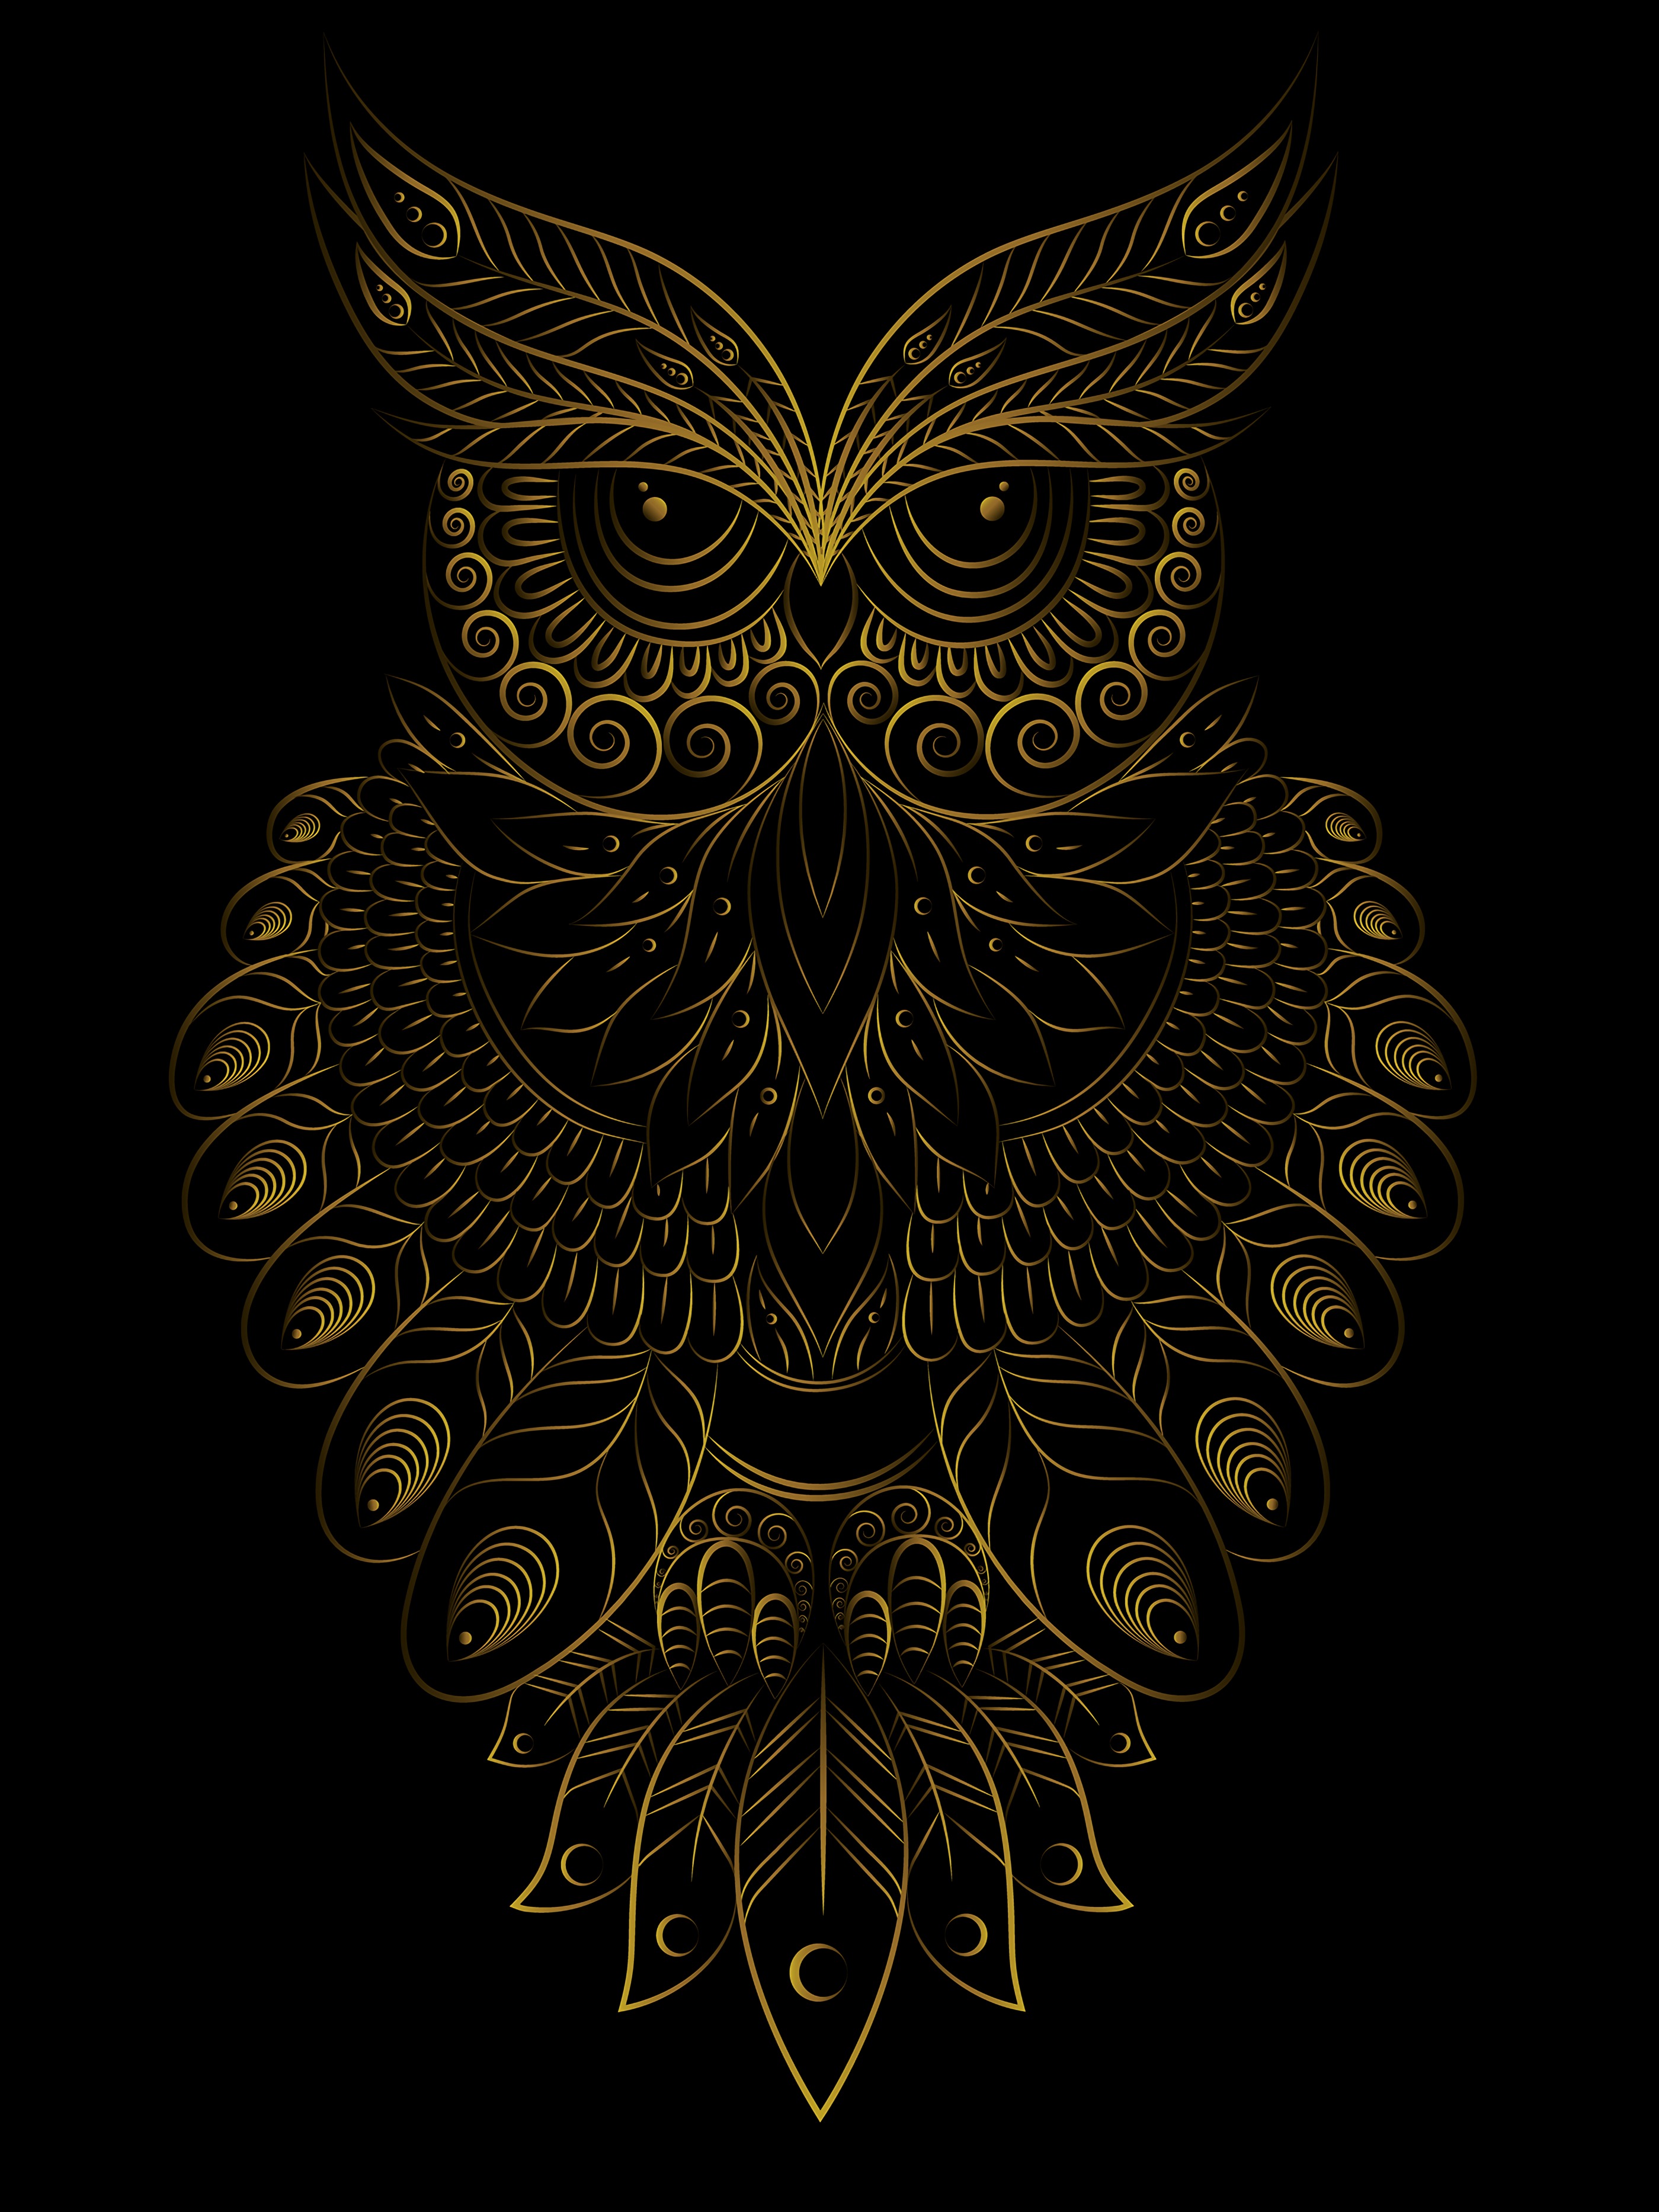 50416 download wallpaper pattern, owl, art, bird screensavers and pictures for free